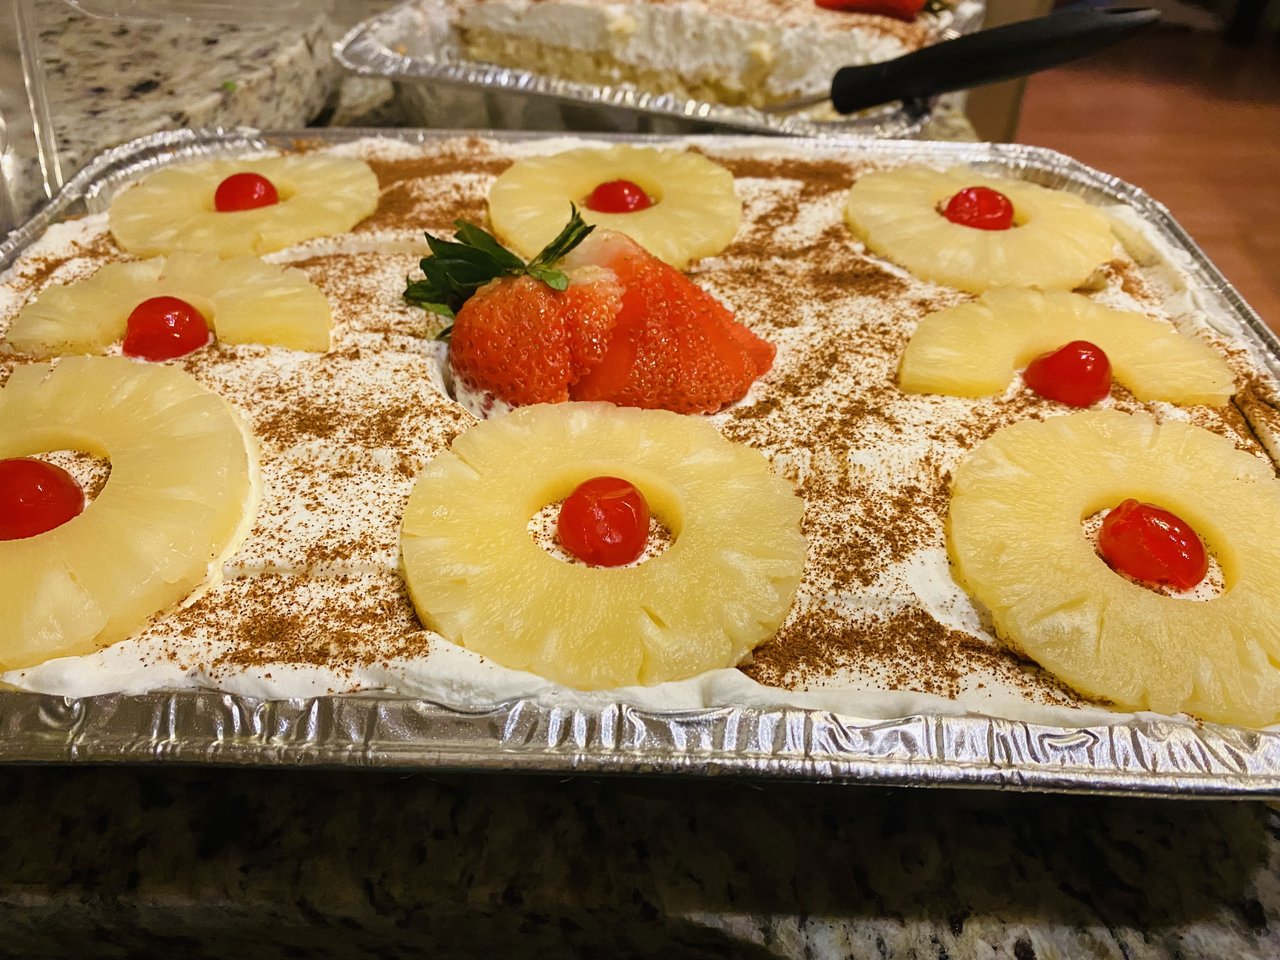 Authentic homemade tres leches